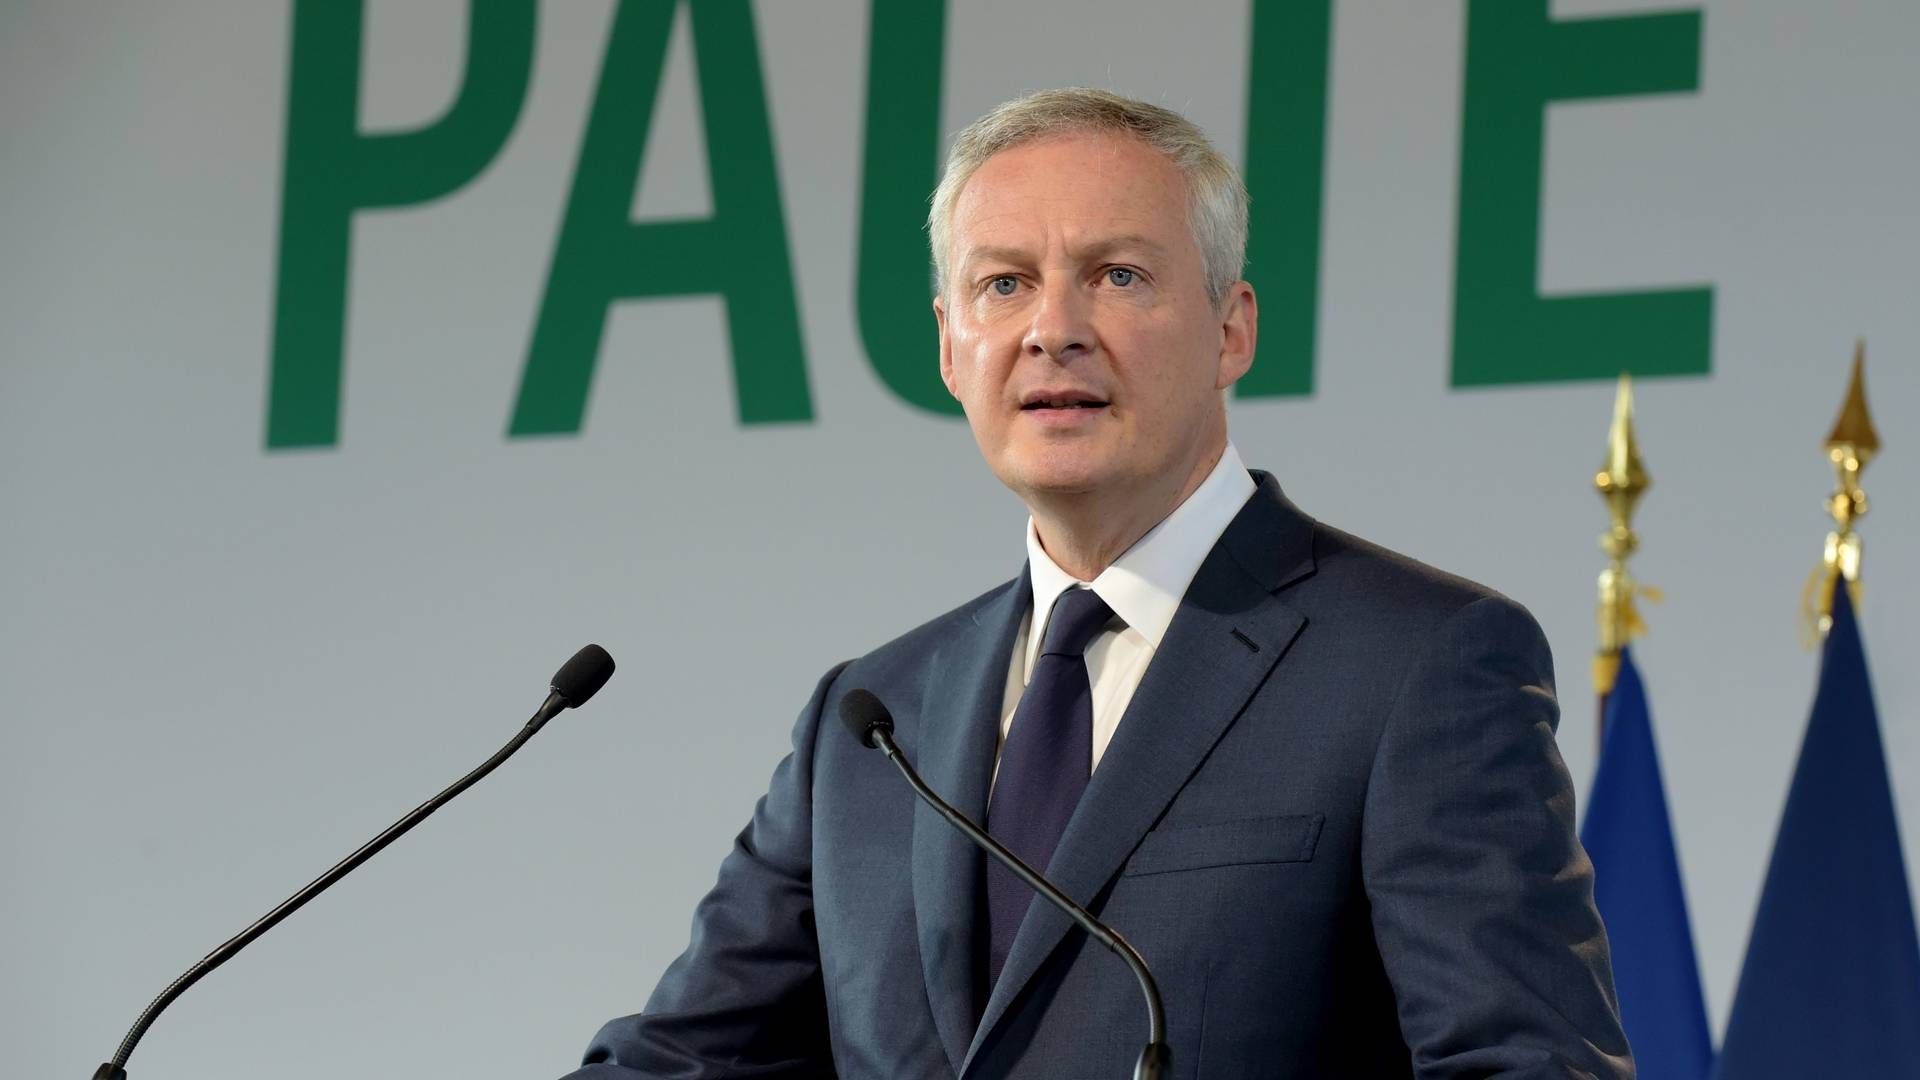 France's Minister of the Economy and Finance Bruno Le Maire. | Photo: ERIC PIERMONT/AFP / AFP